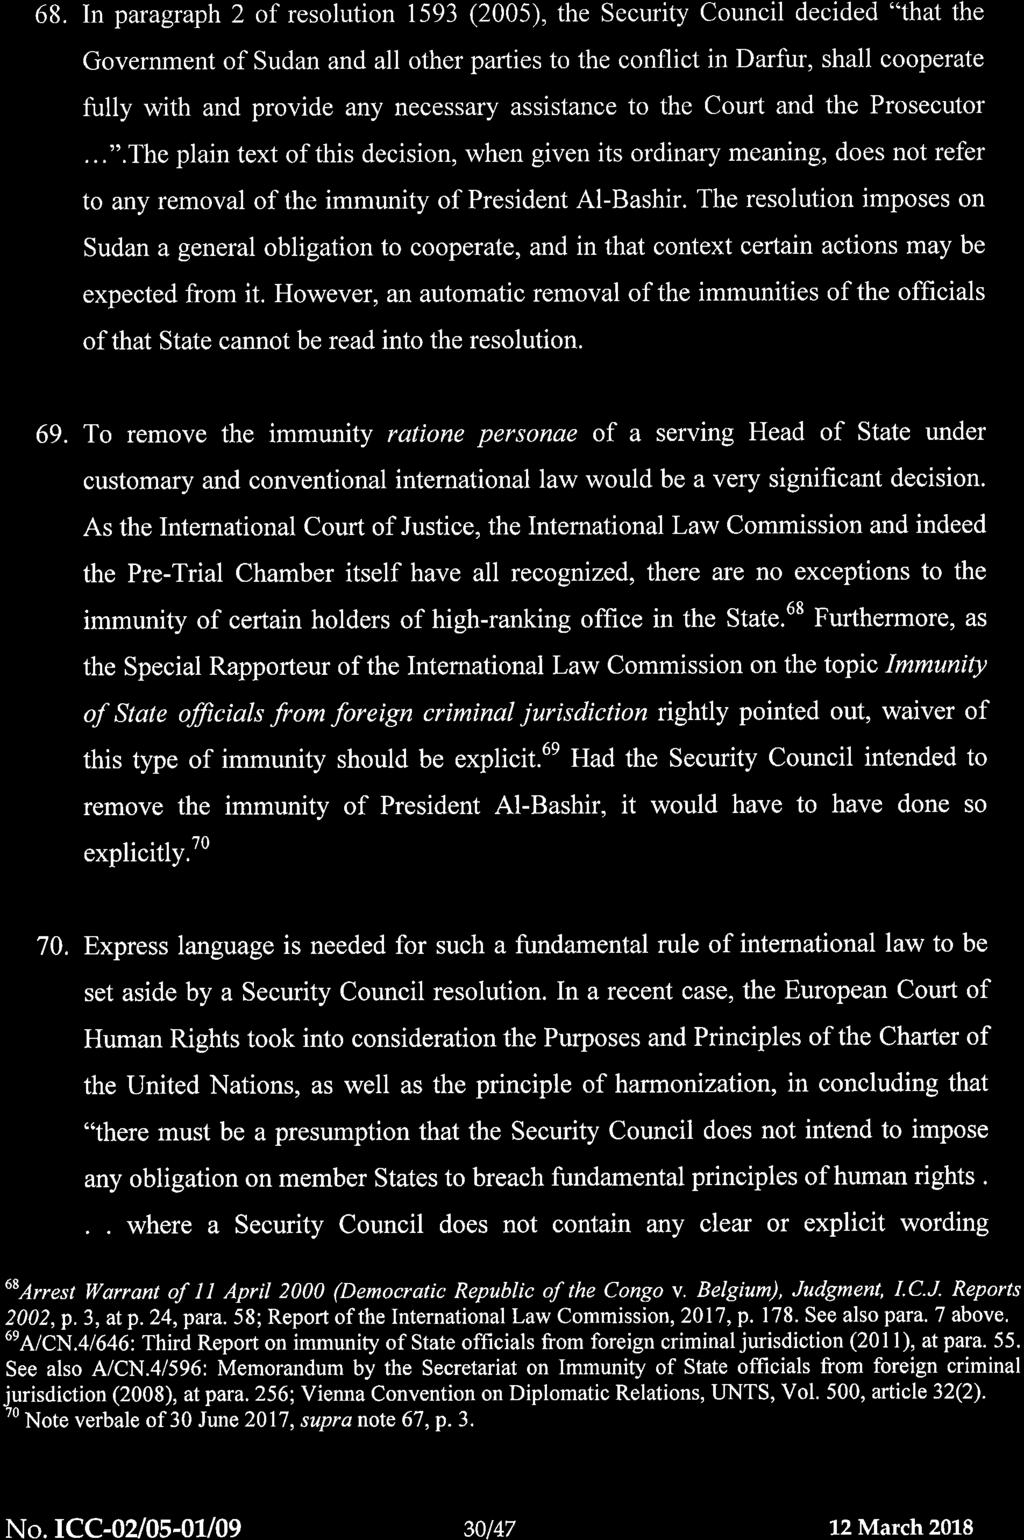 ICC-02/05-01/09-326 12-03-2018 30/47 RH PT OA2 a) Security Council resolution I 593 (2005) does not remove the immunity of President Al-Bashir 68.